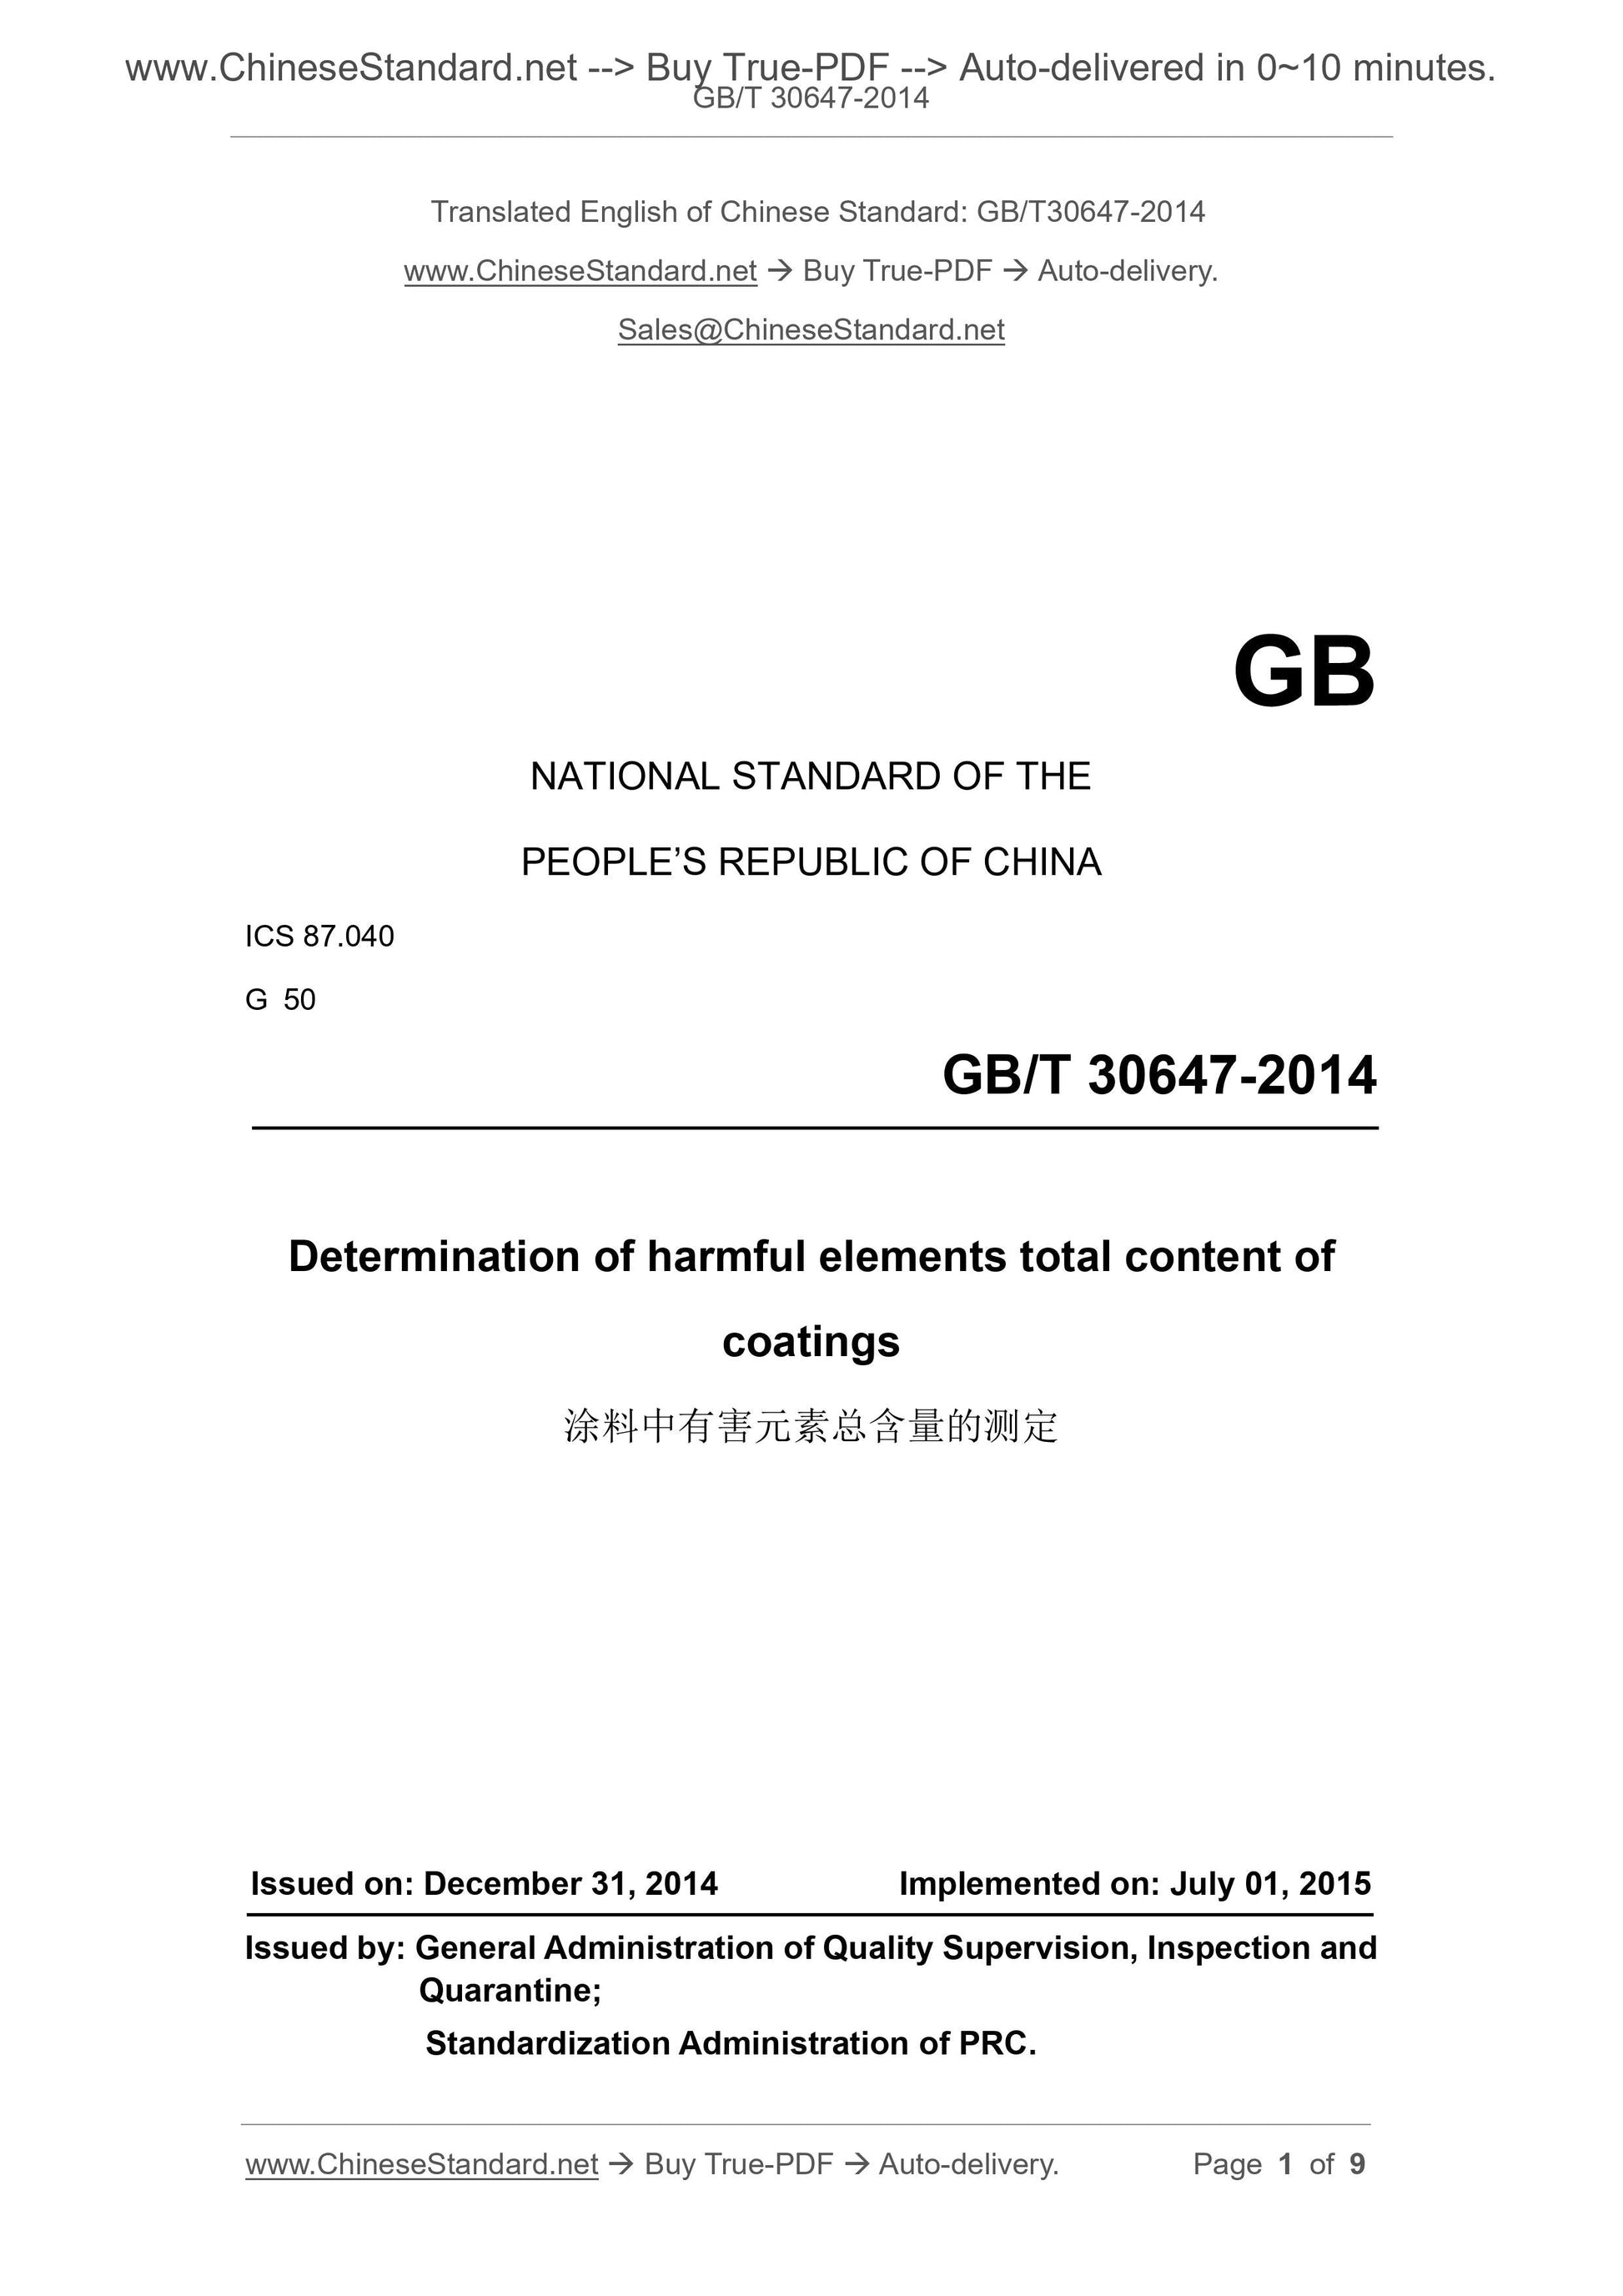 GB/T 30647-2014 Page 1